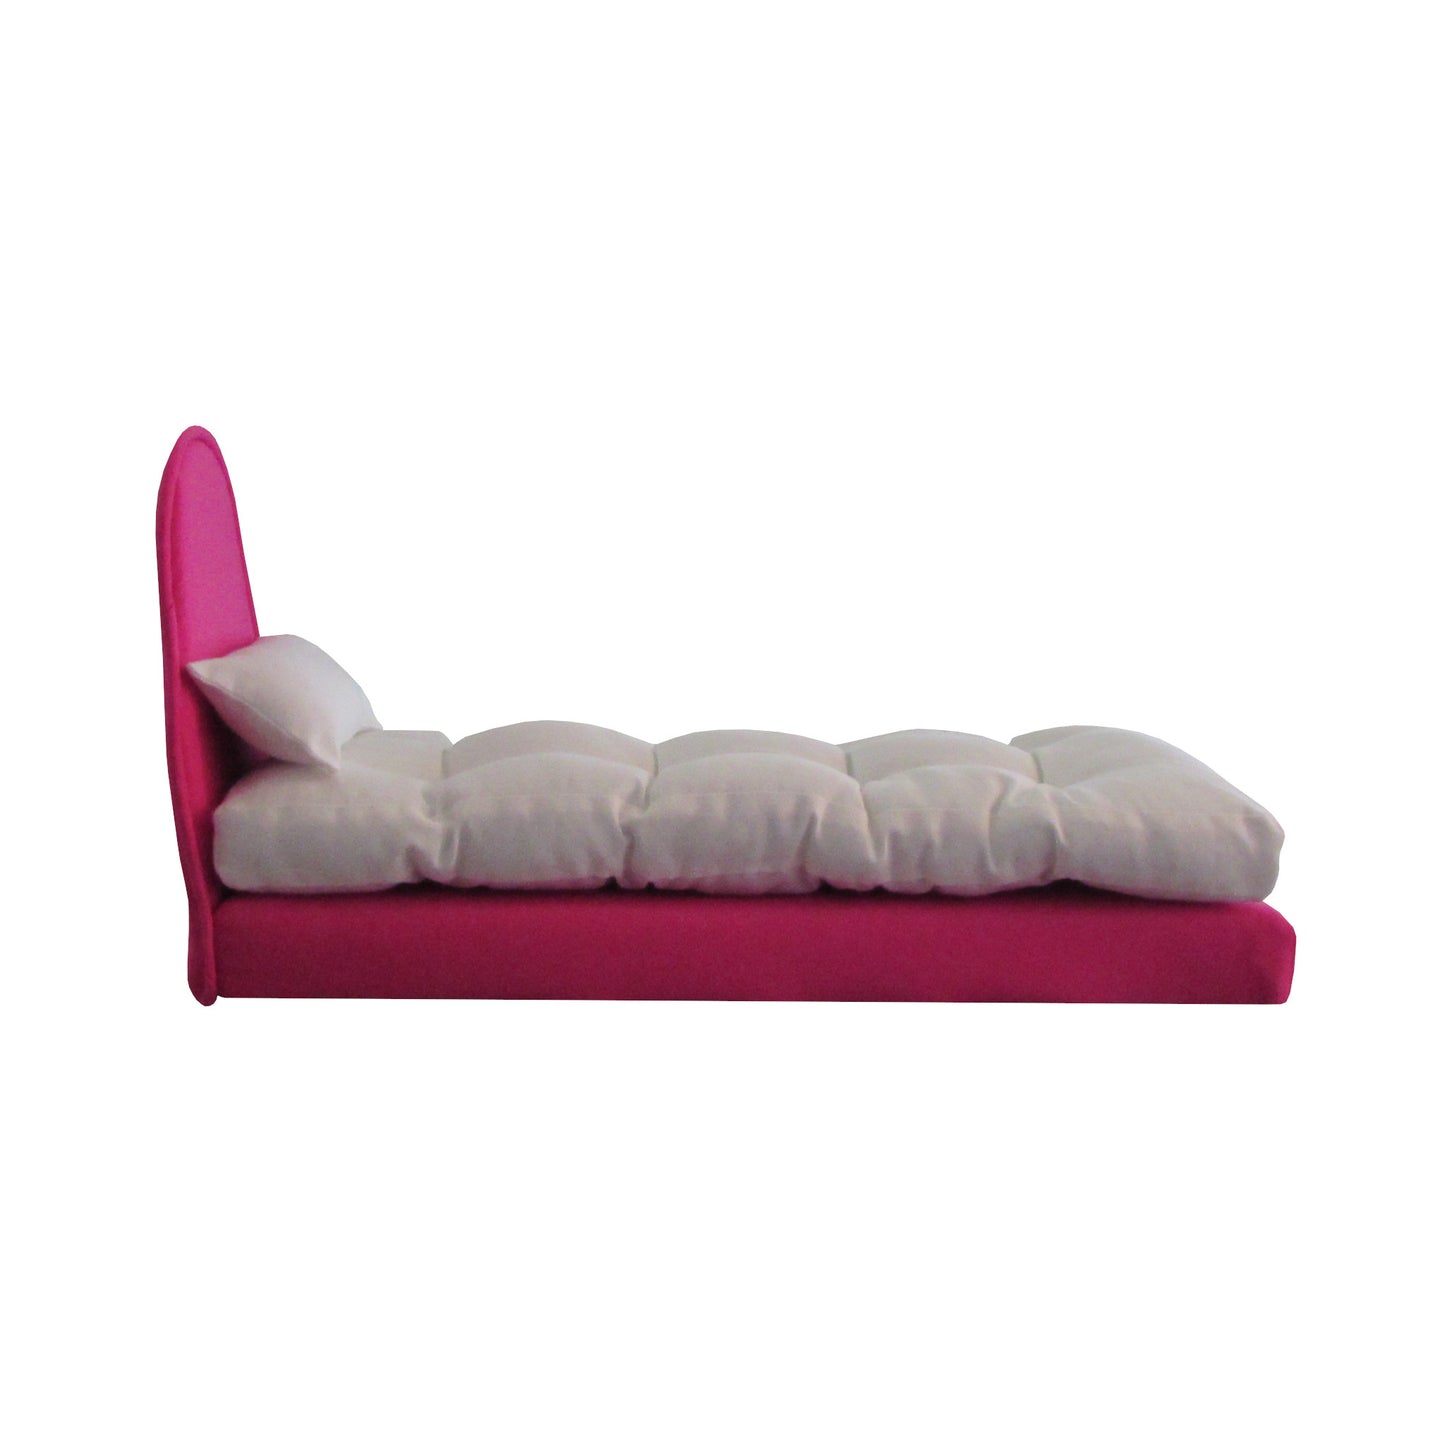 Upholstered Bright Pink Doll Bed for 11.5-inch and 12-inch dolls